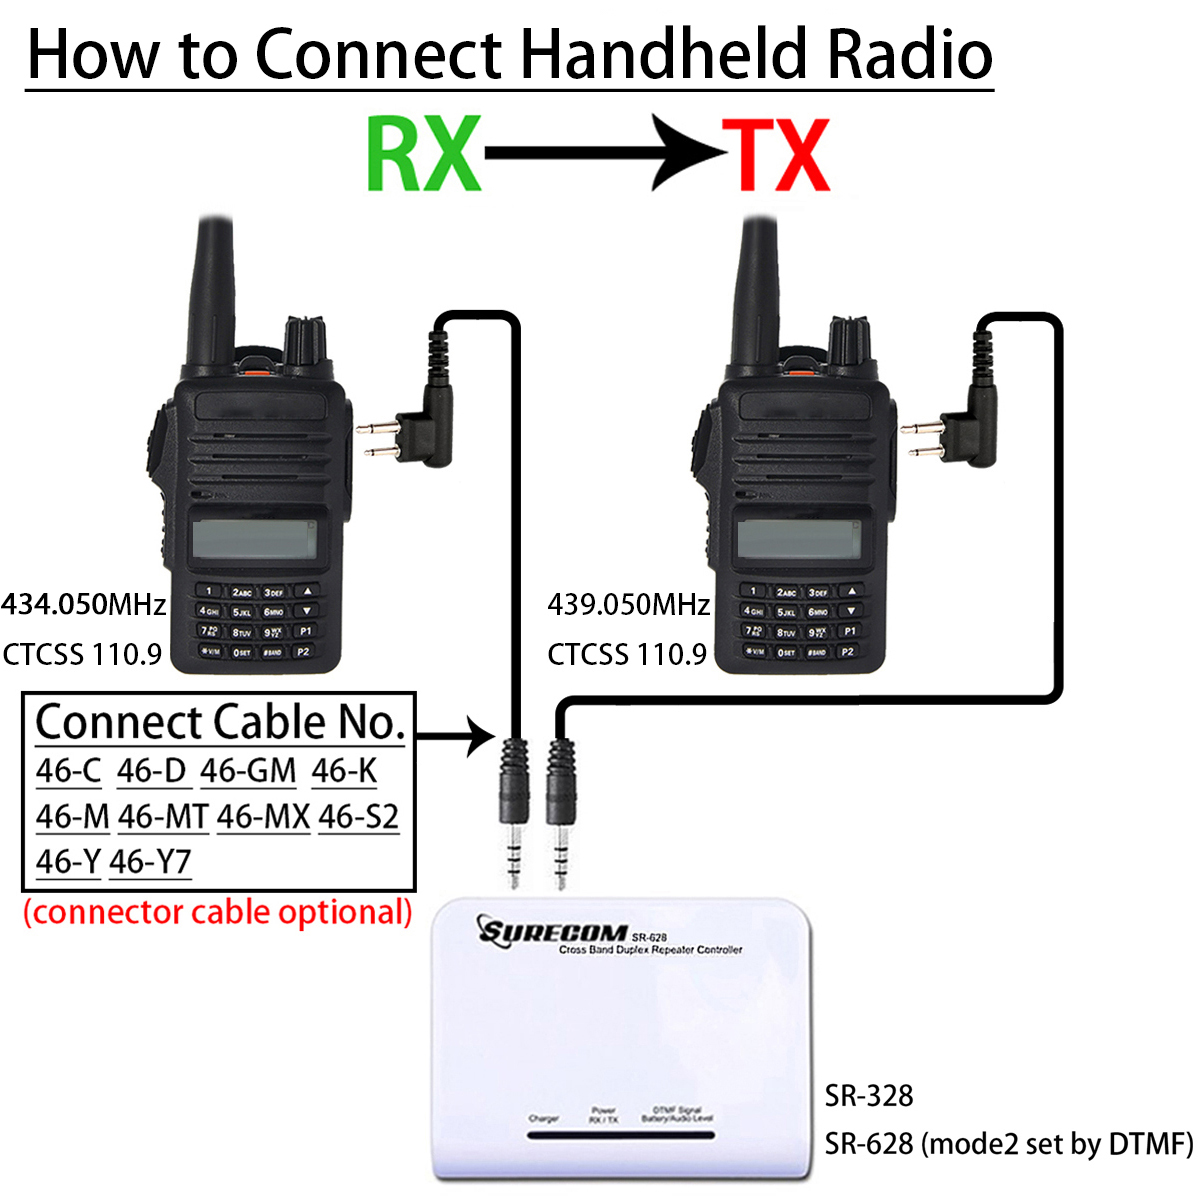 SR-328 Duplex Repeater Controller with ICOM Cable 409shop,walkie-talkie,Handheld Transceiver- Radio picture